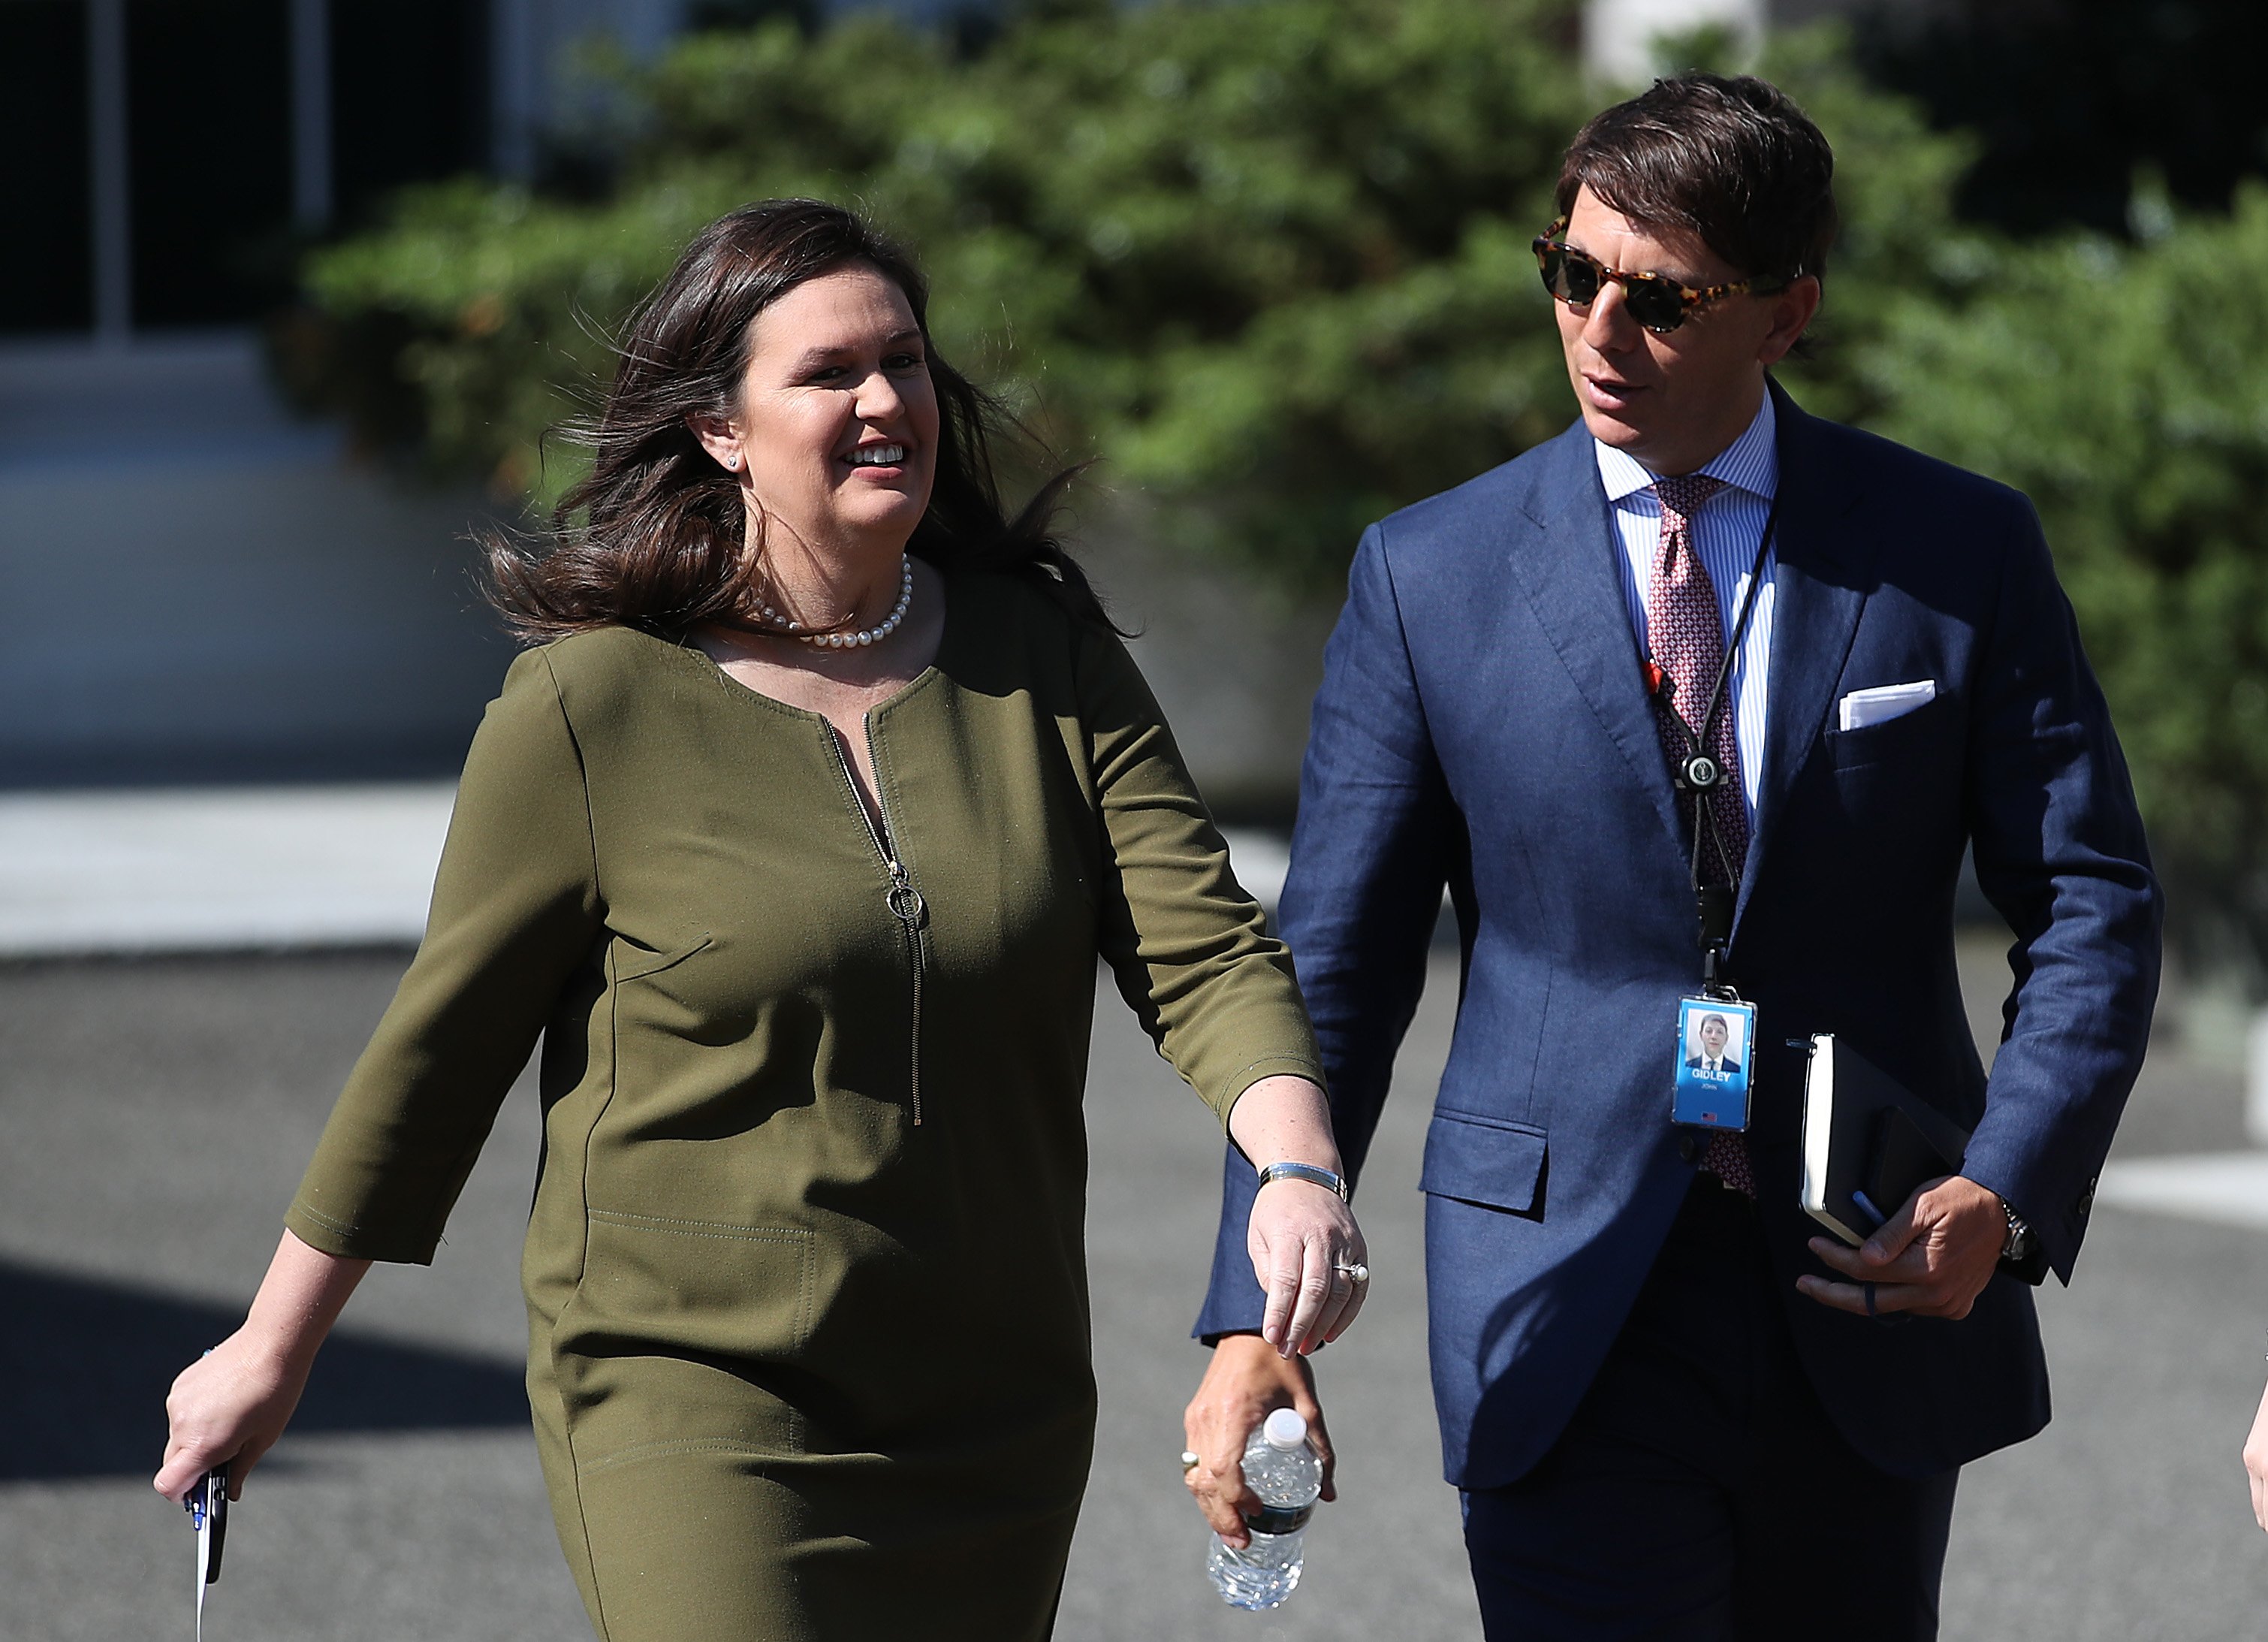 WASHINGTON, DC - MAY 31: White House press secretary Sarah Sanders walks with deputy press secretary Hogan Gidley at the White House May 31, 2019 in Washington, DC. Sanders responded to questions this morning about potential tariffs with Mexico announced by U.S. President Donald Trump last night via Twitter. (Photo by Win McNamee/Getty Images)